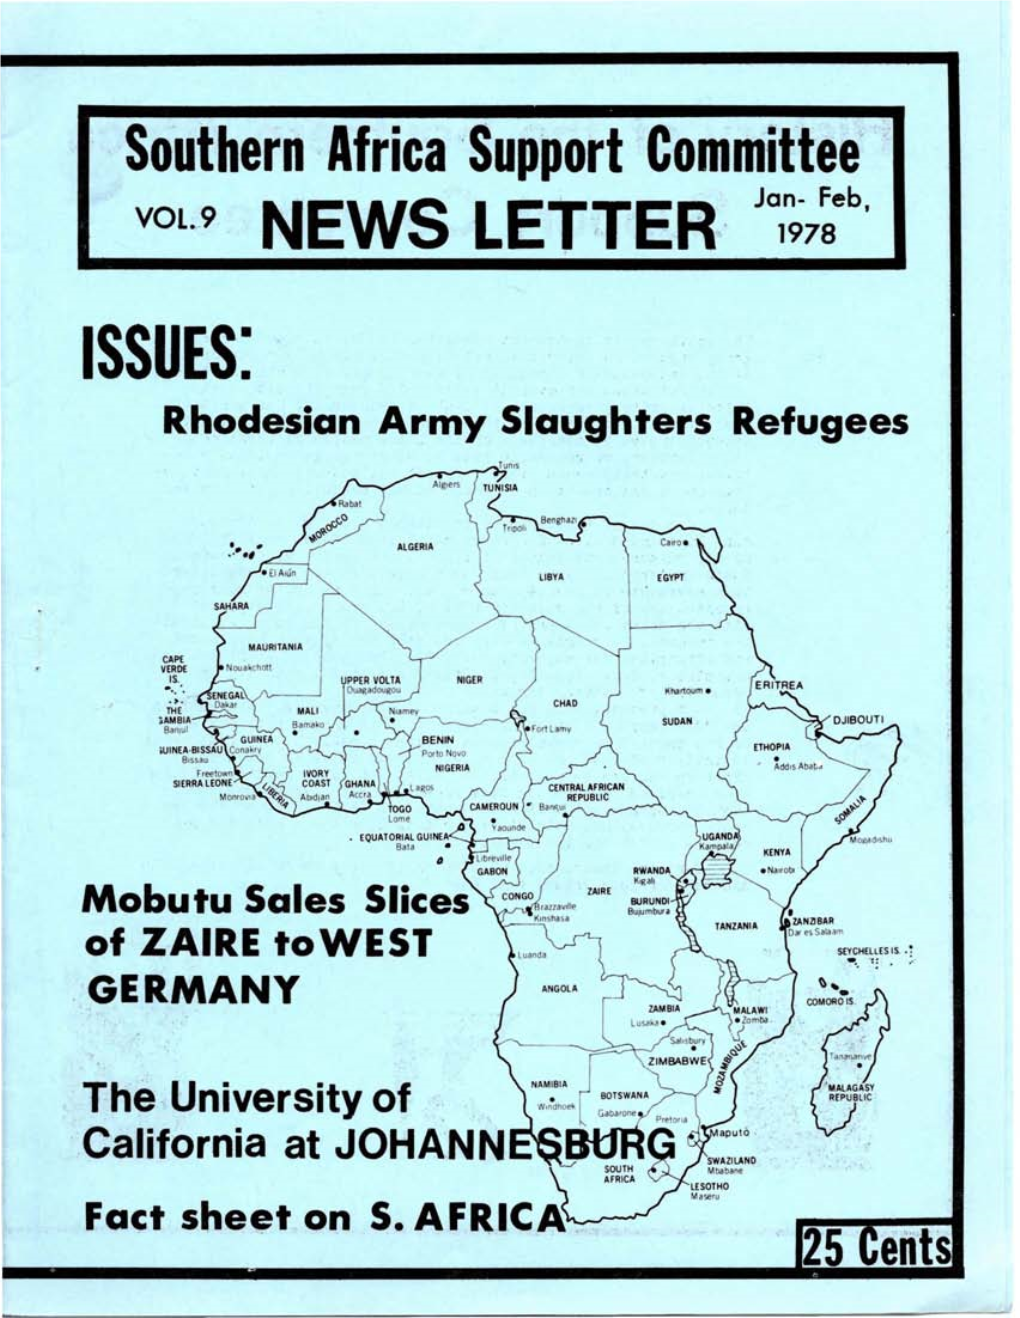 ISSUES: Rhodesian Army Slaughters Refugees